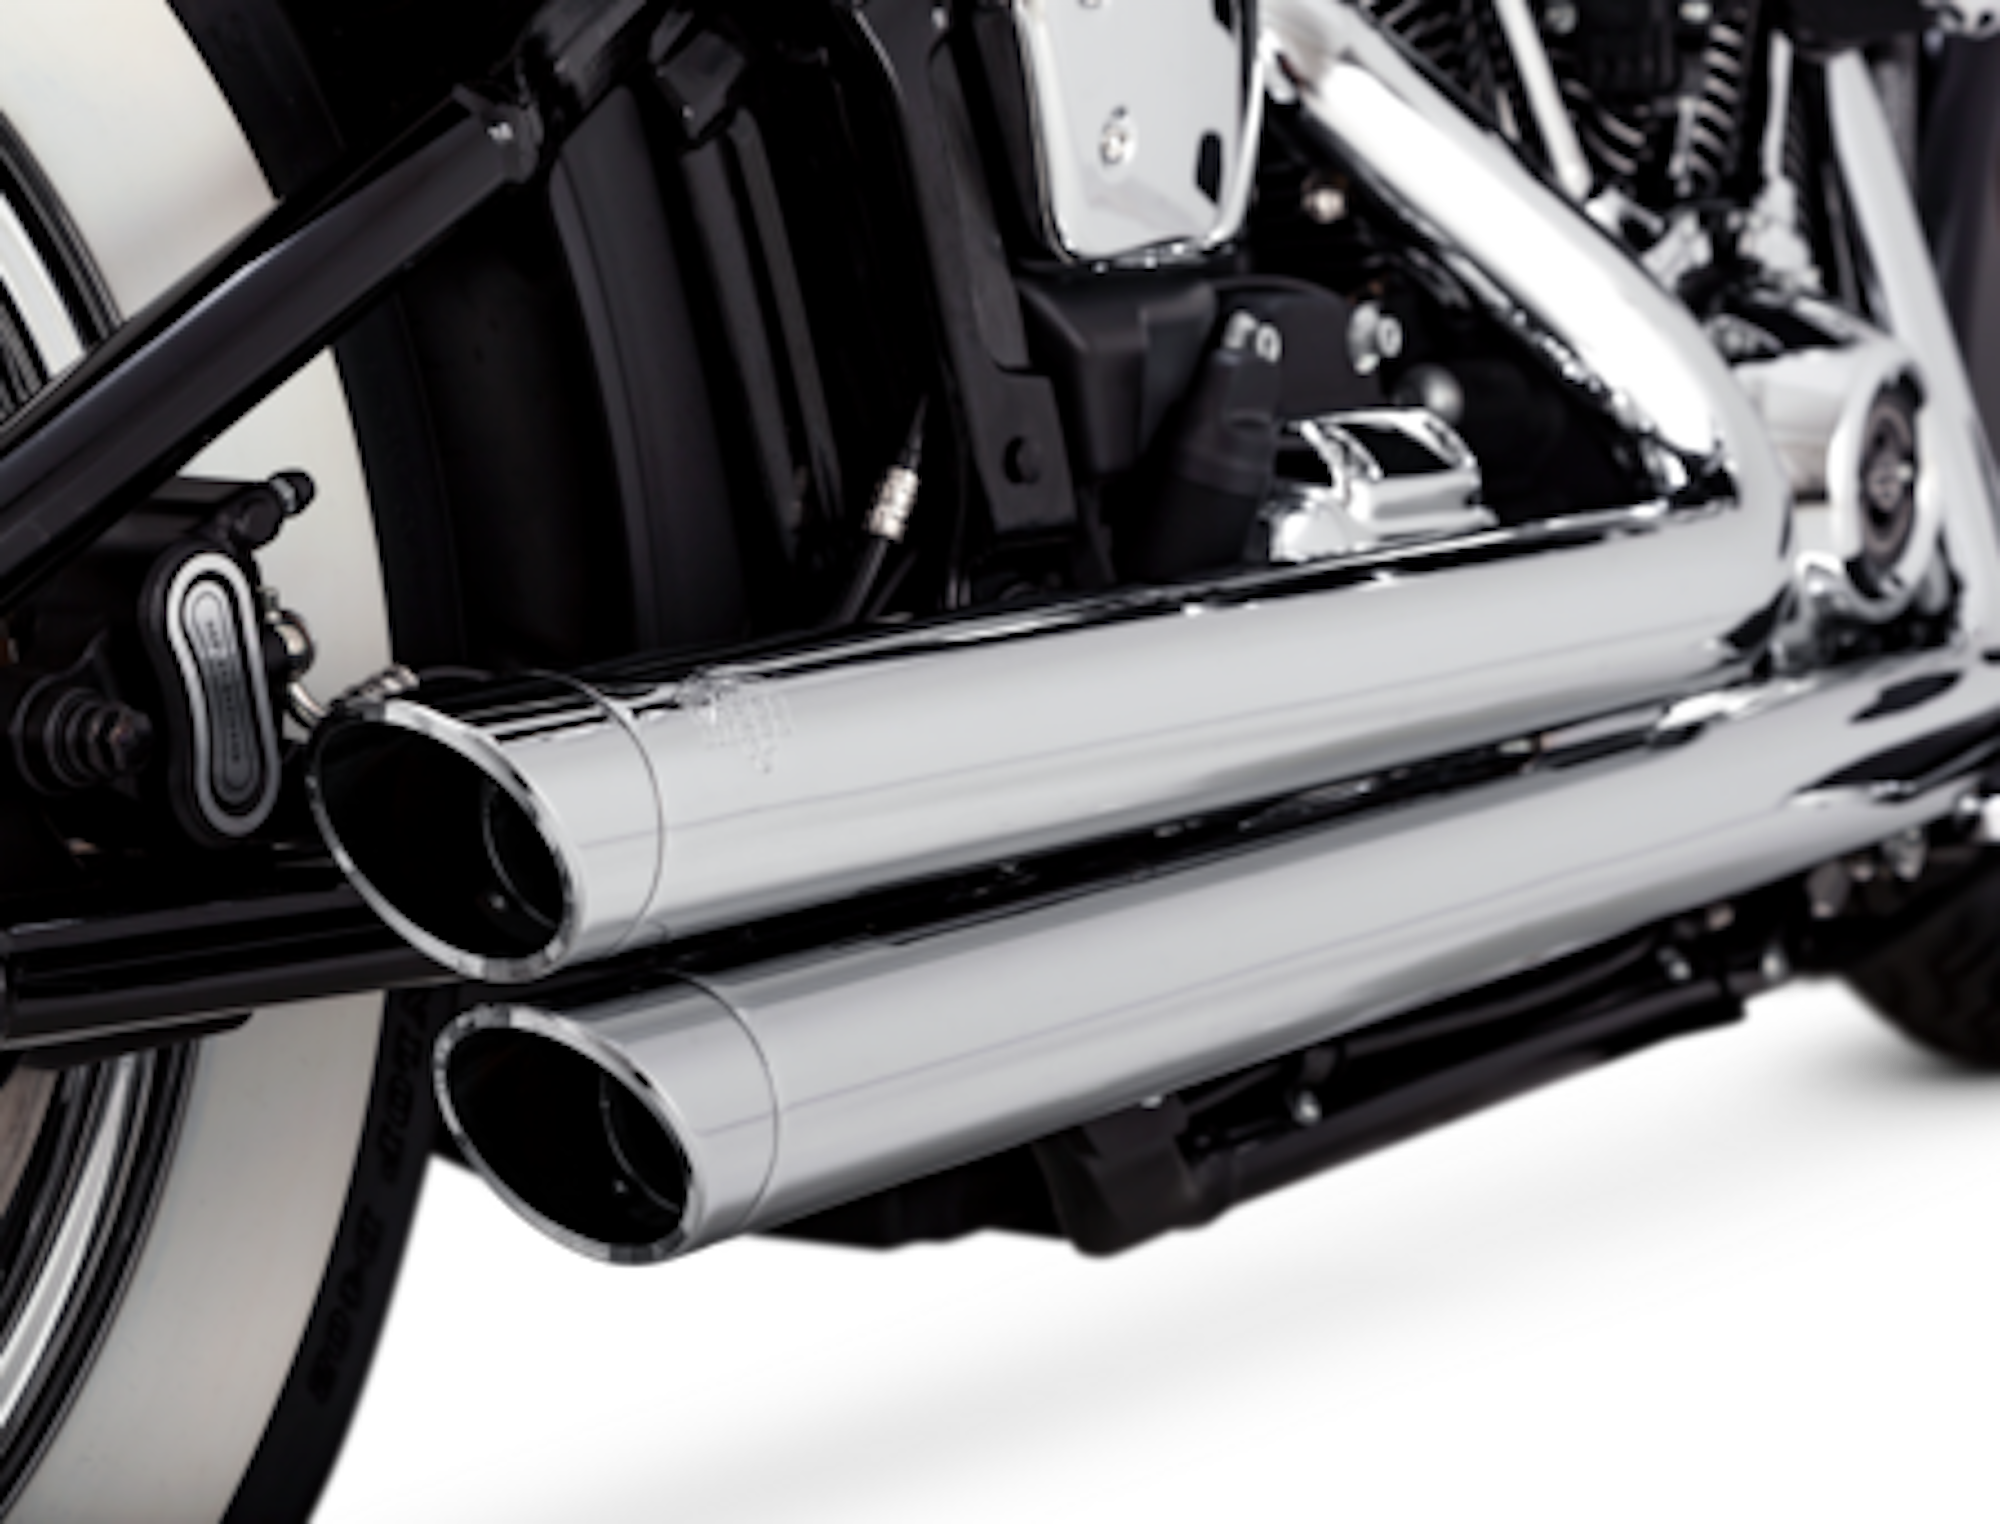 the Vance & Hines Big Shots Staggered pipe. Media sourced from the relevant press release.